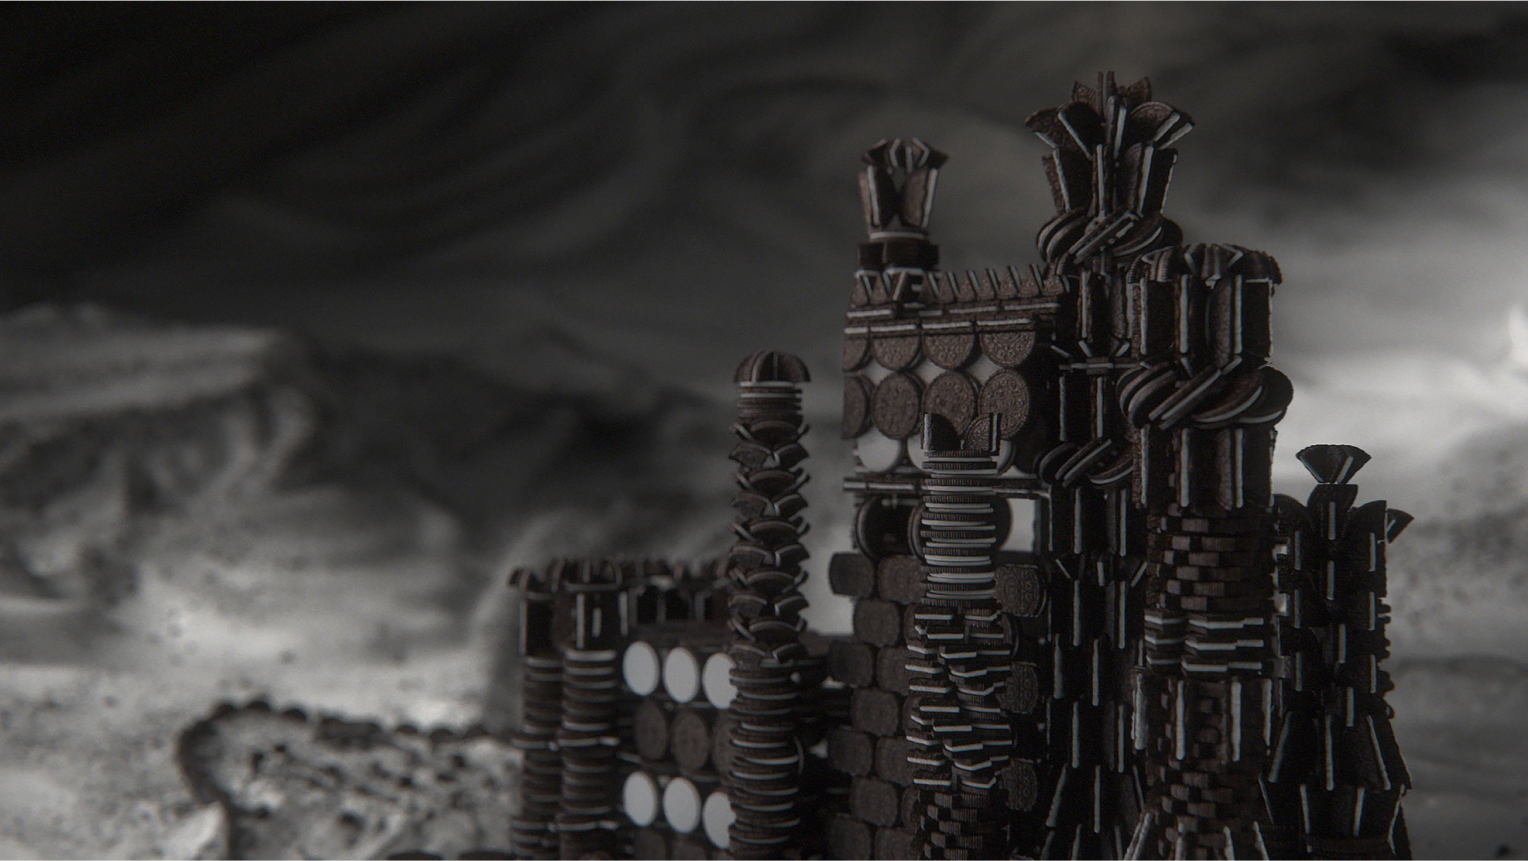 Fortress from Game of Thrones, sculpted out of Oreo Cookies